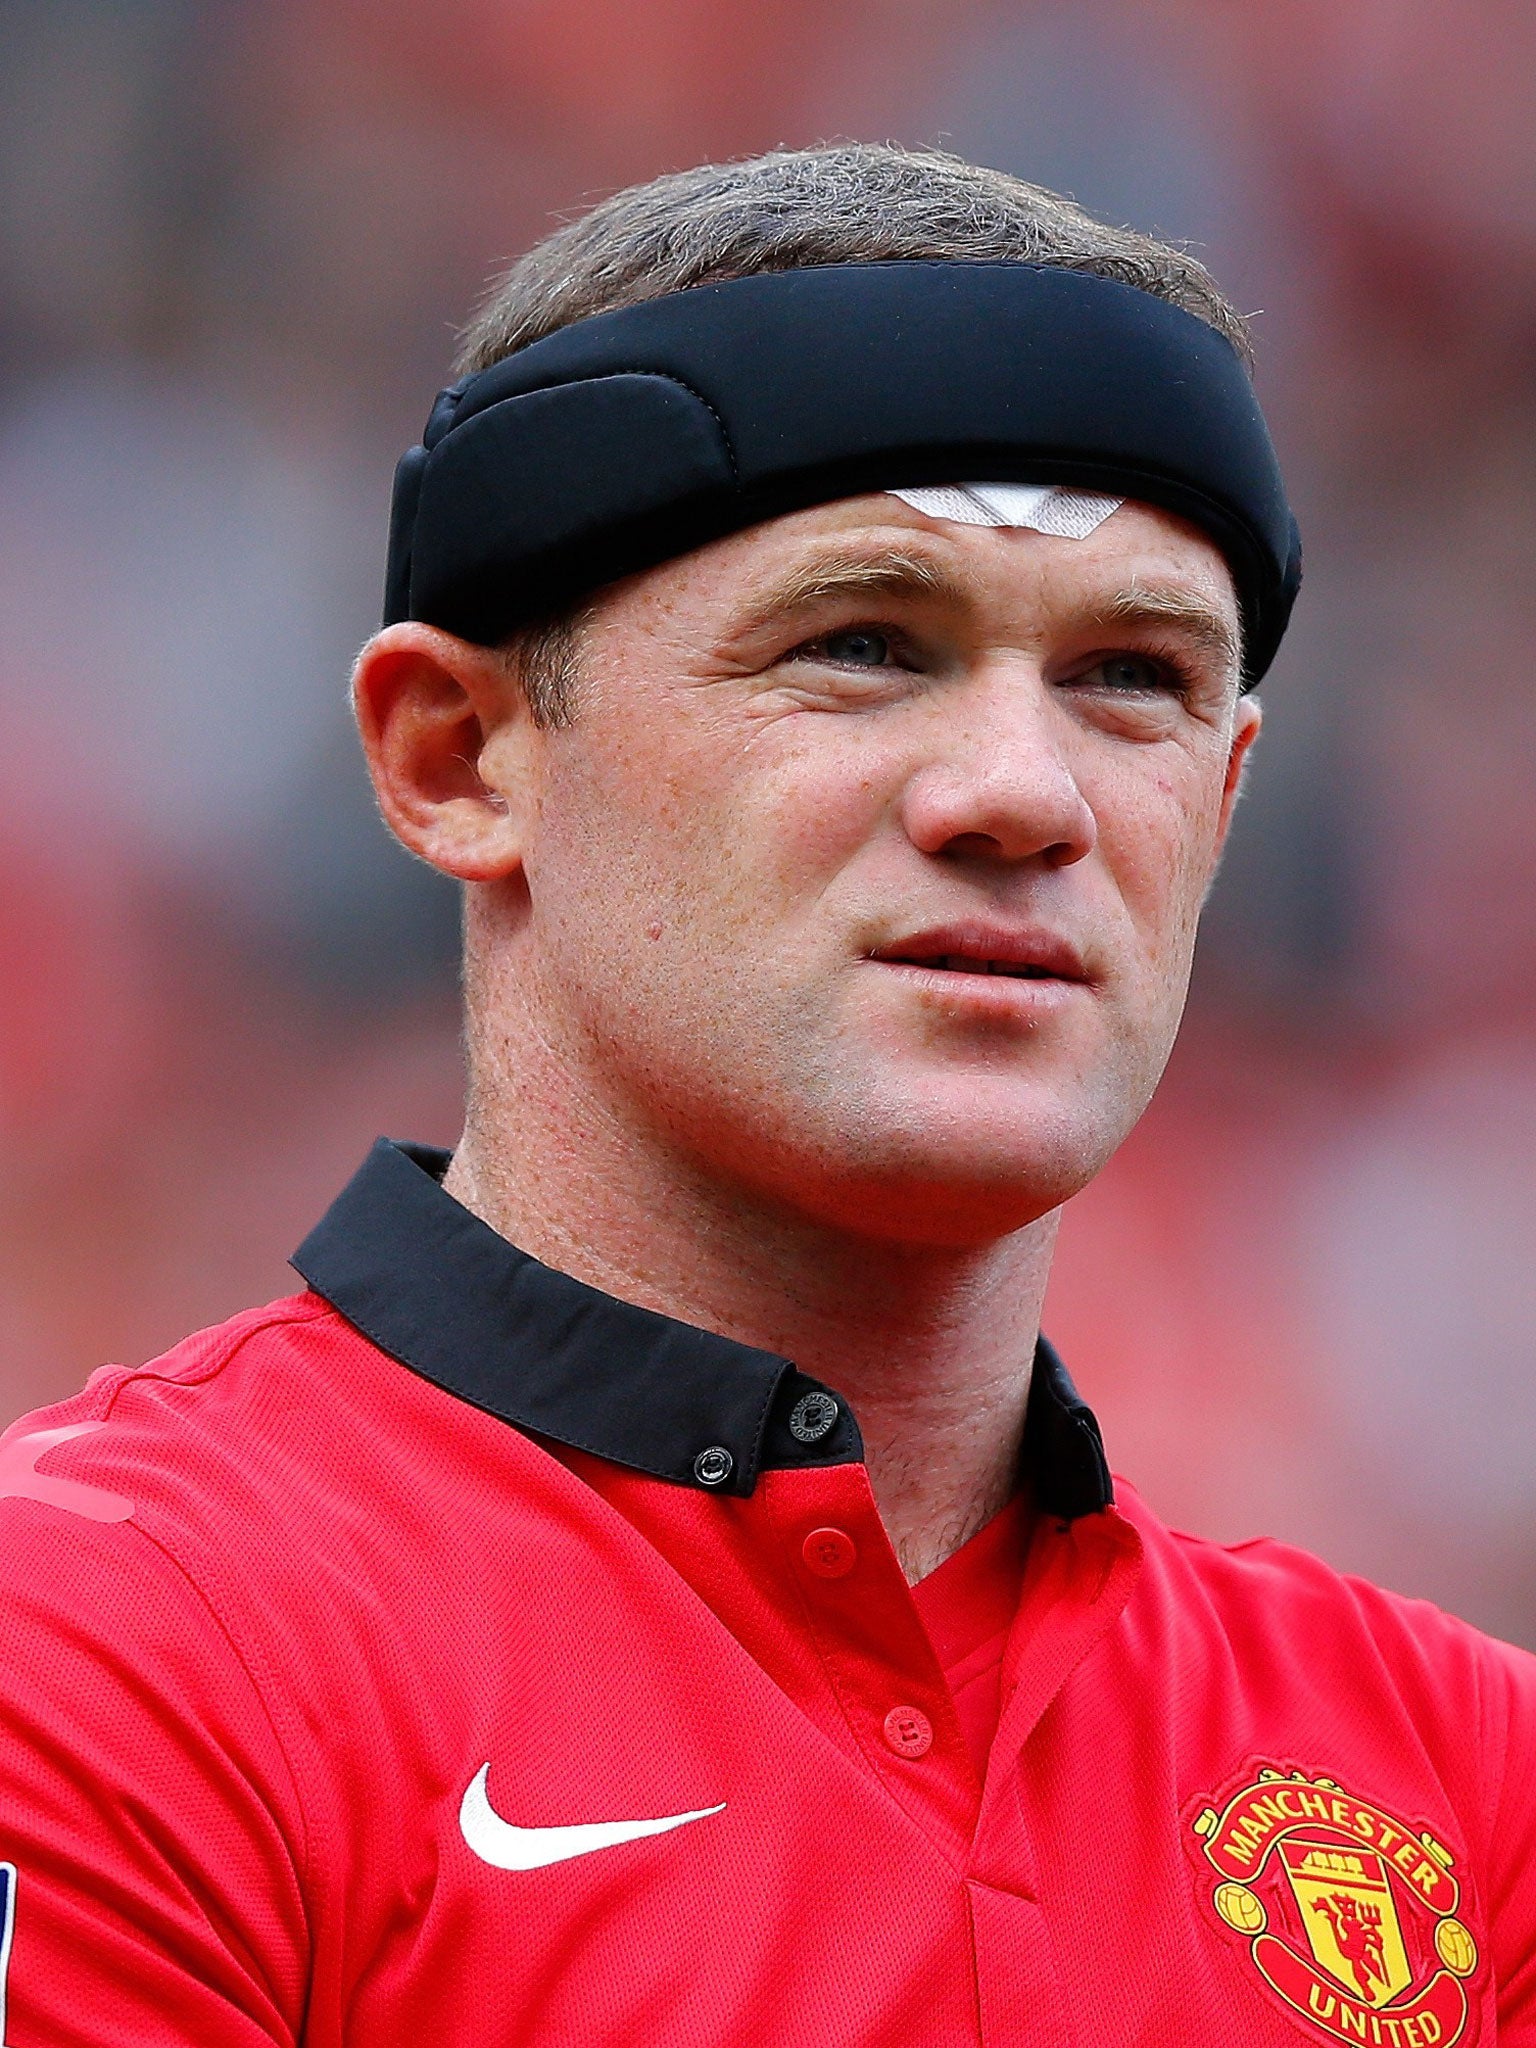 Wayne Rooney: Despite a desire to leave, he has remained popular with Old Trafford fans